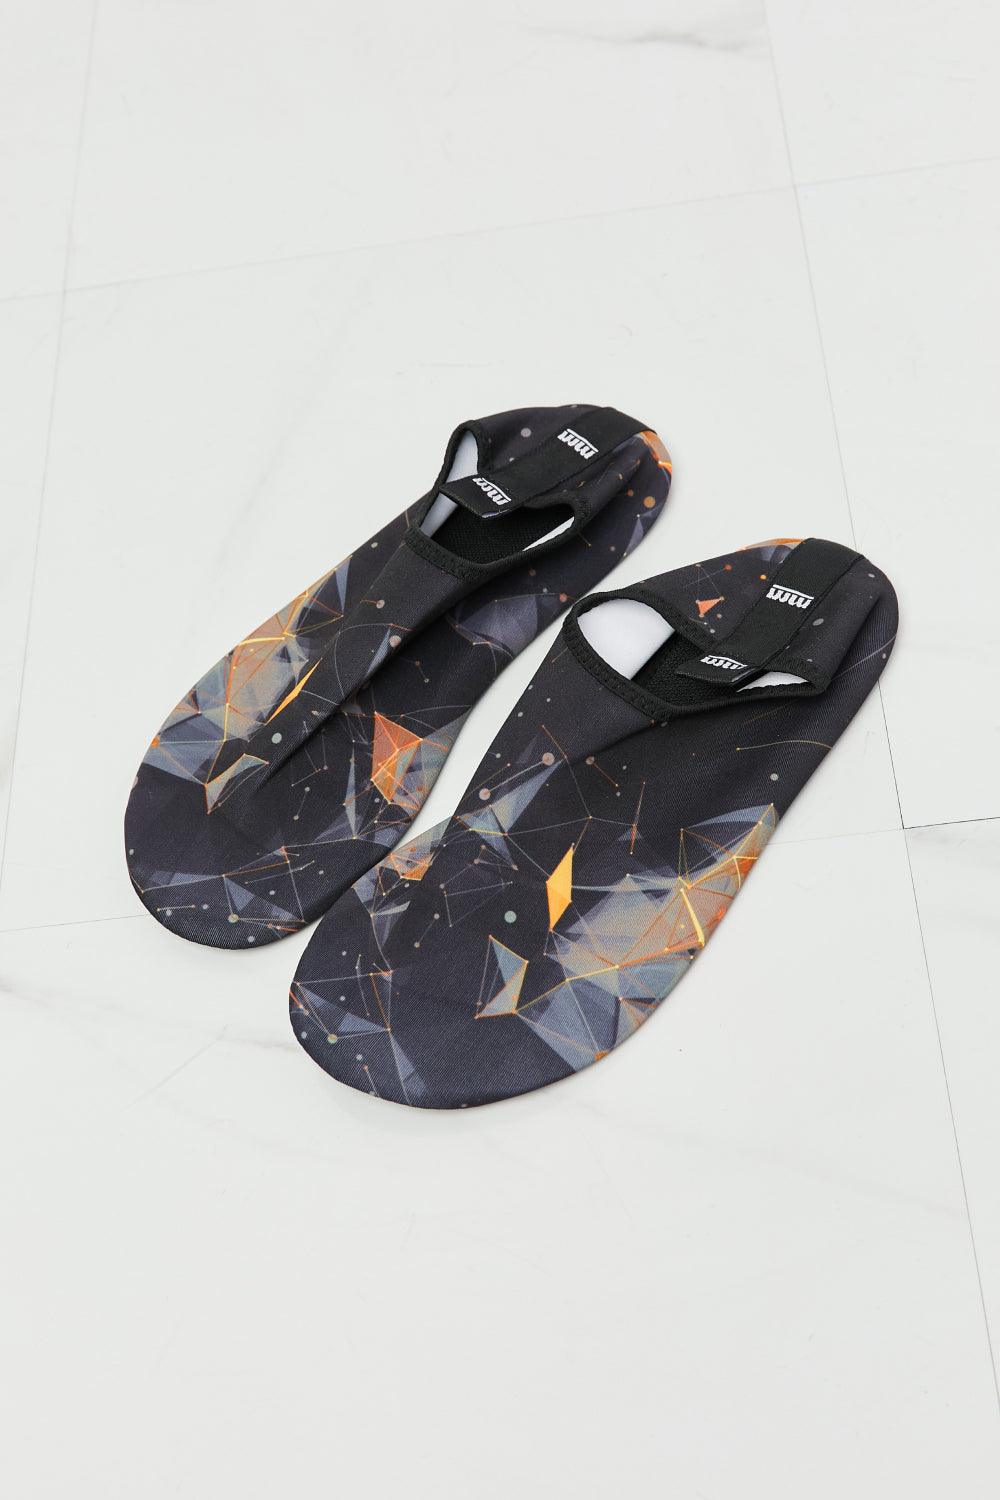 MMshoes On The Shore Water Shoes in Black/Orange - God's Girl Gifts And Apparel